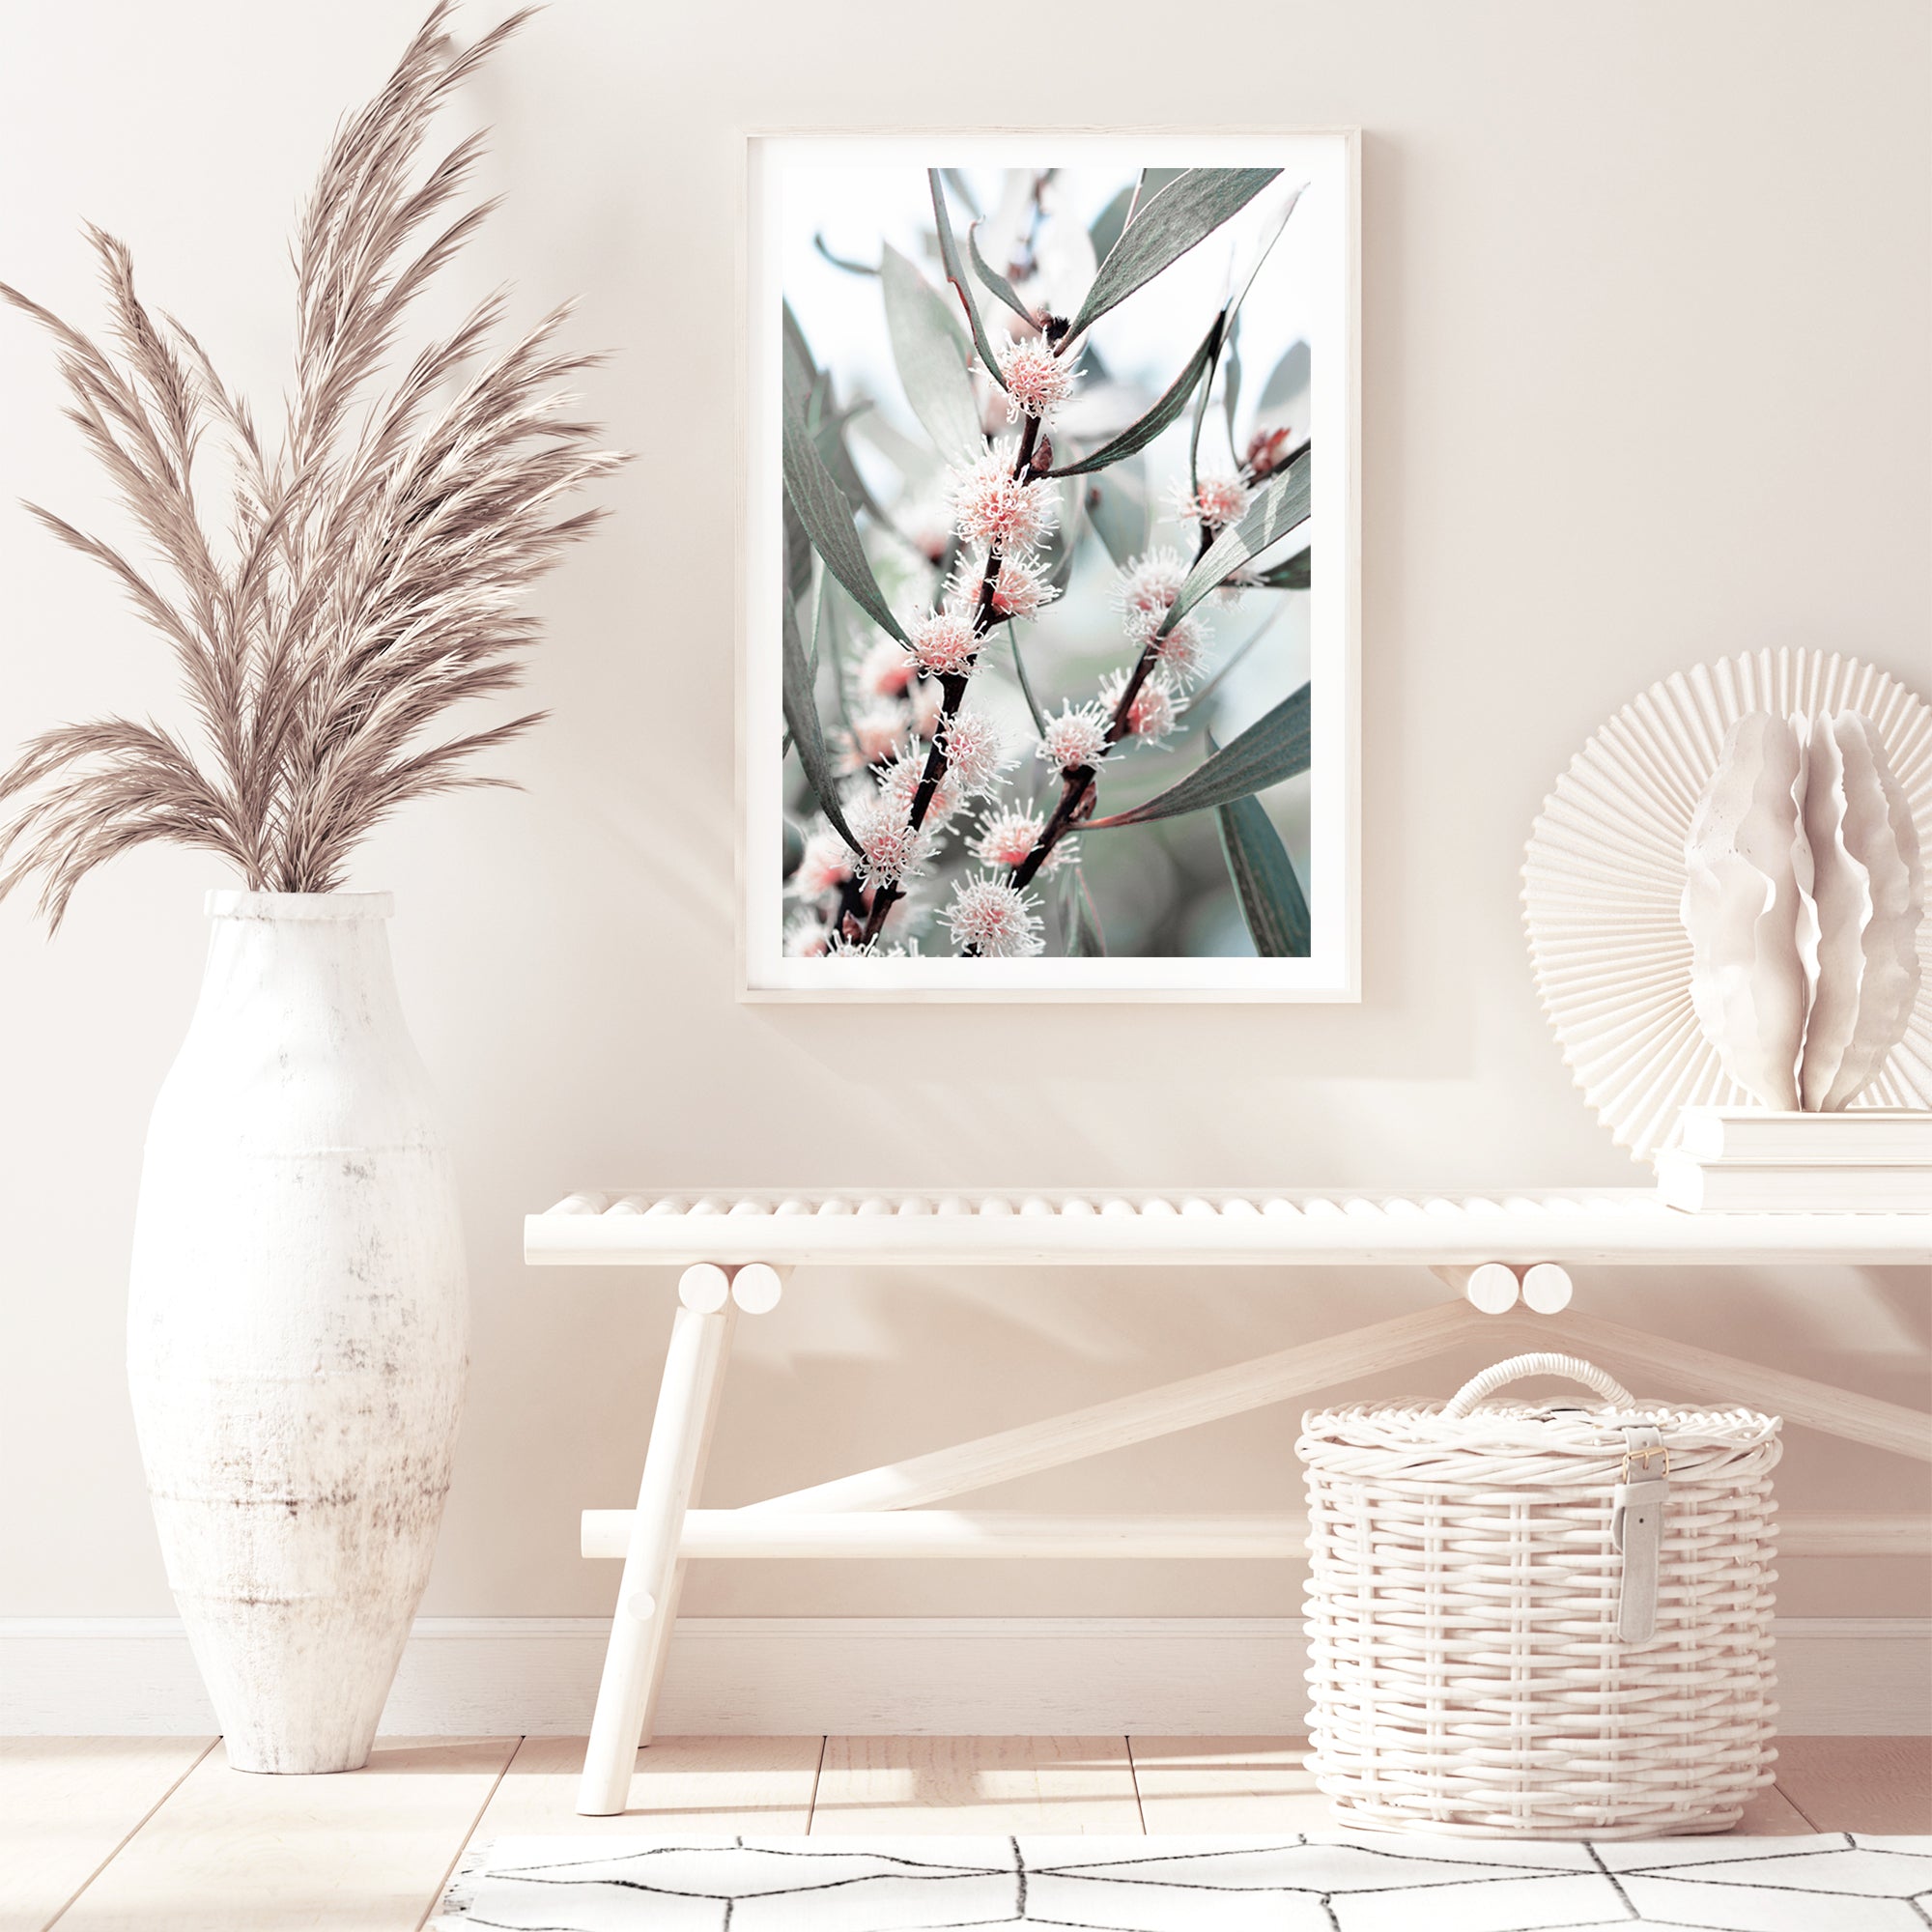 A framed or unframed wall art print of eucalytpus pink wild flowers and green leaves with branches in the background on canvas or photo print.  